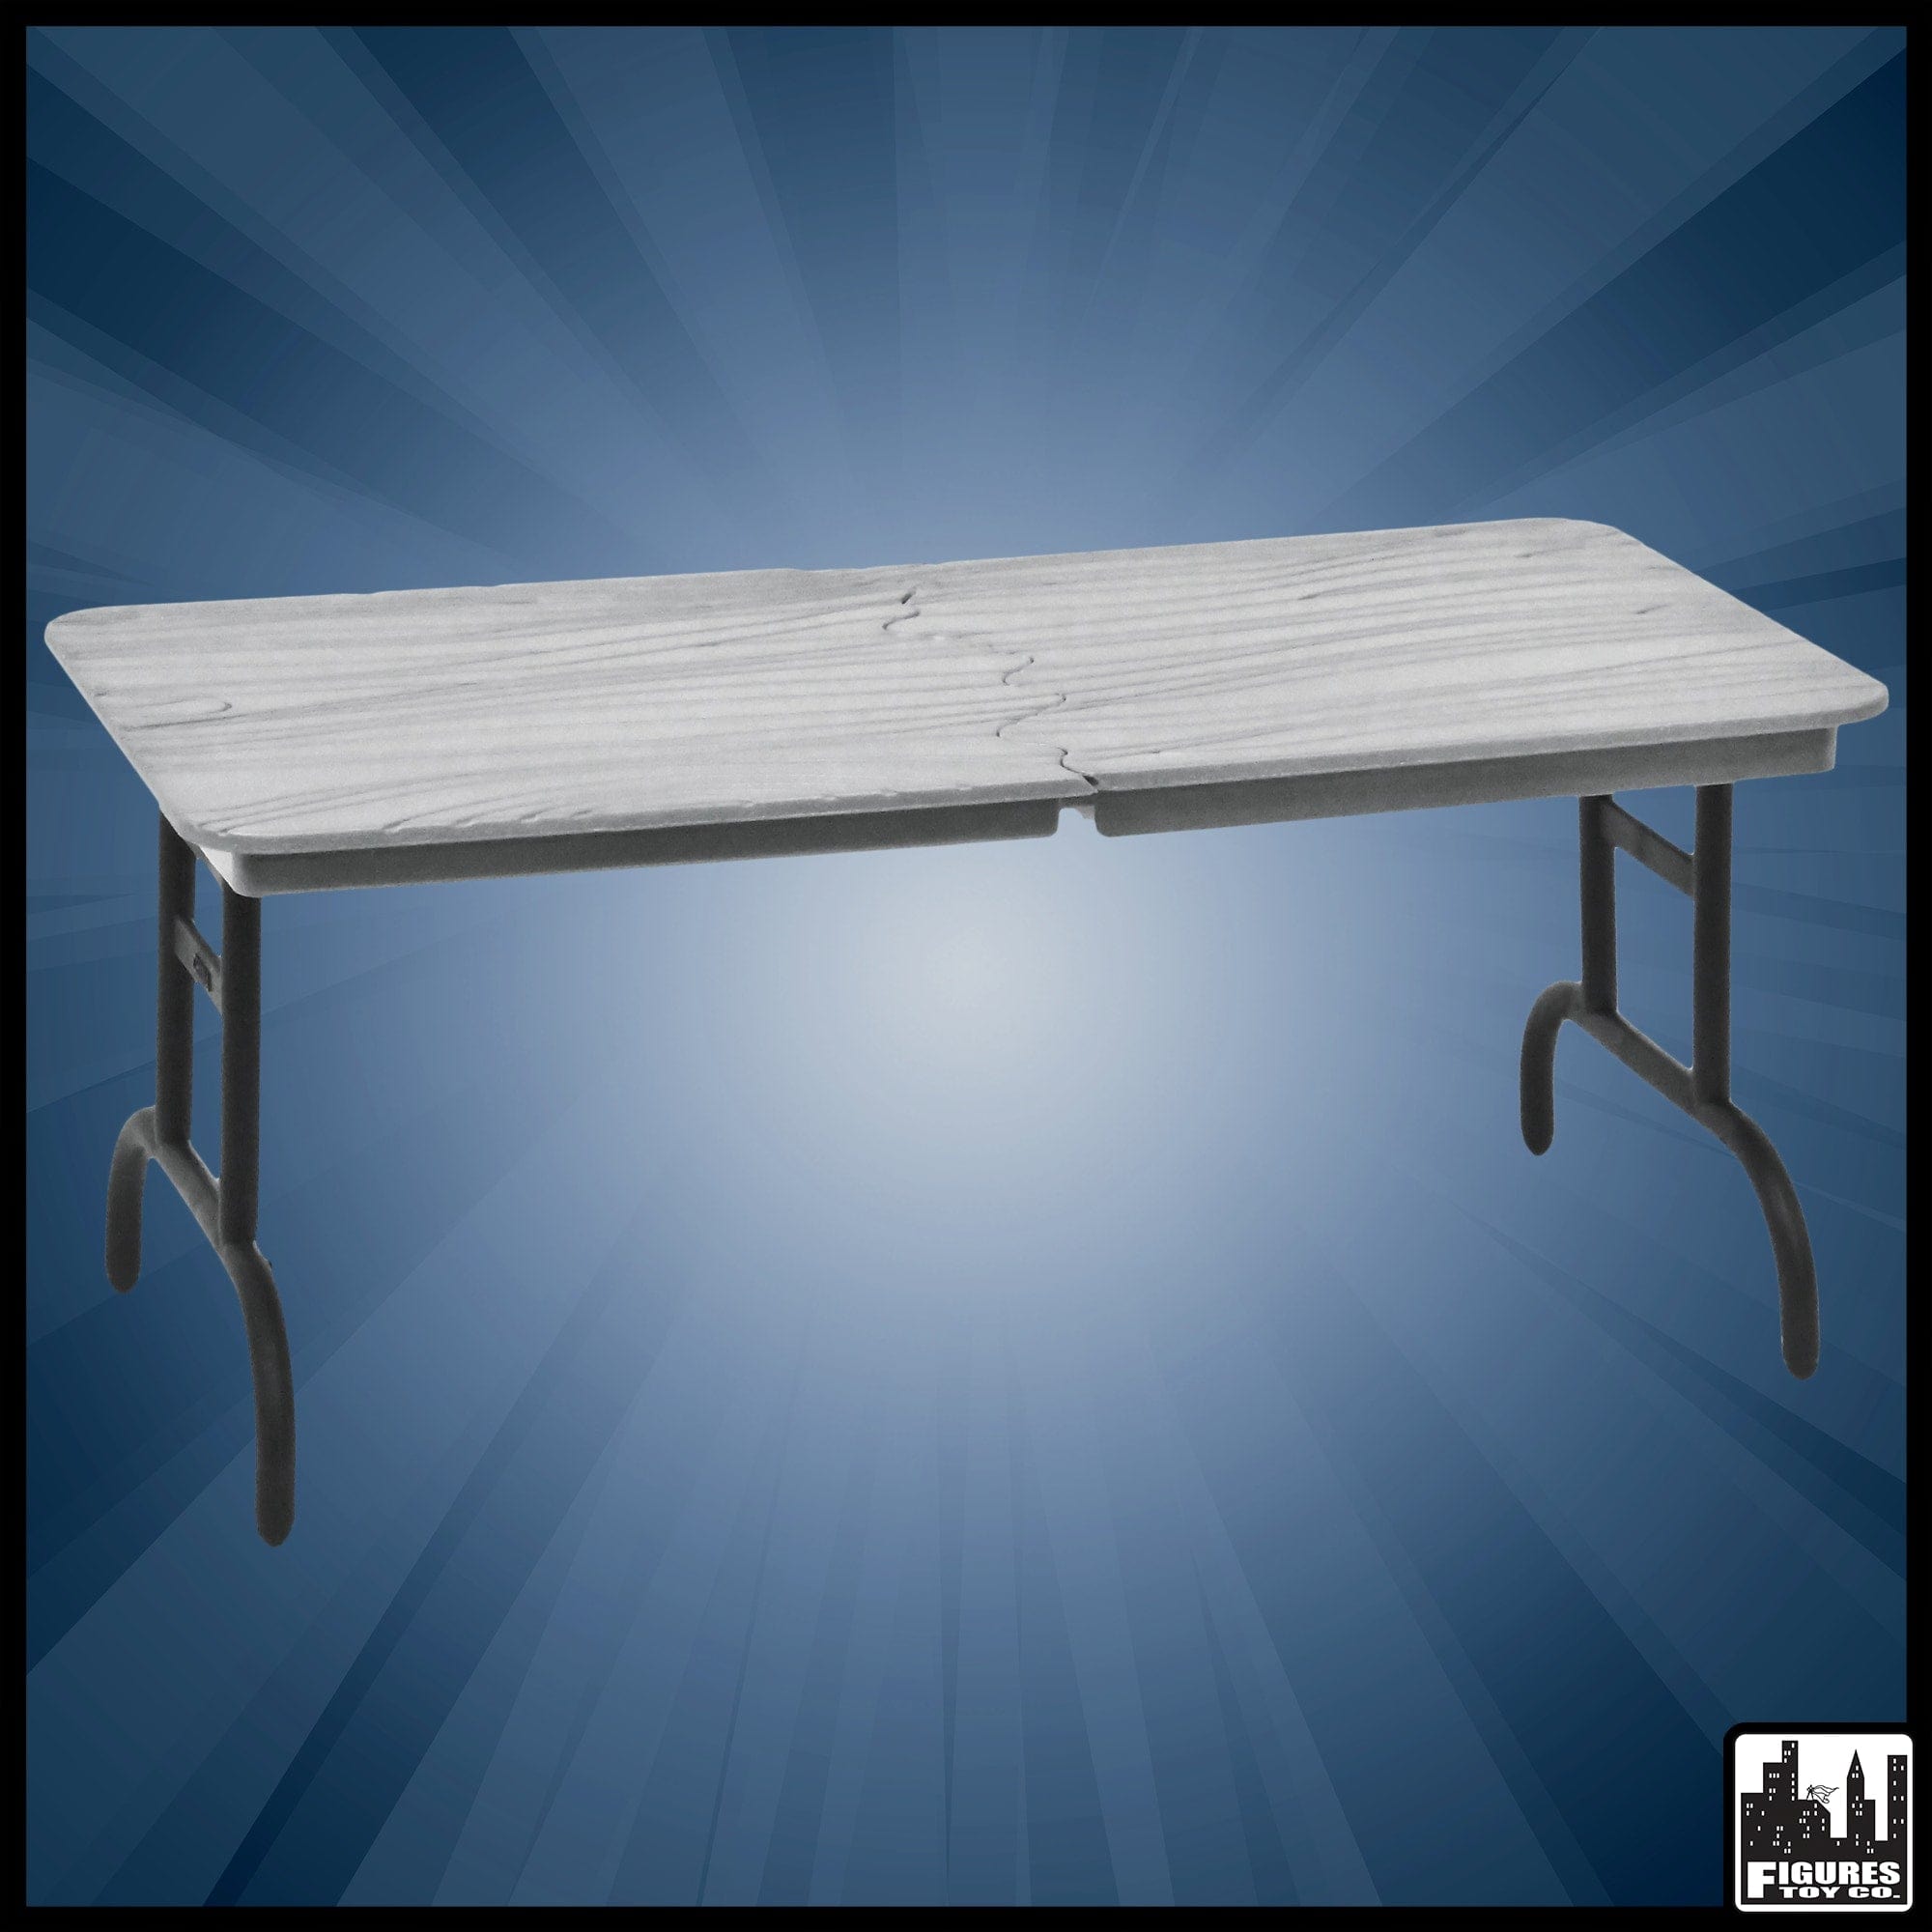 Silver Breakaway Table For WWE Wrestling Action Figures